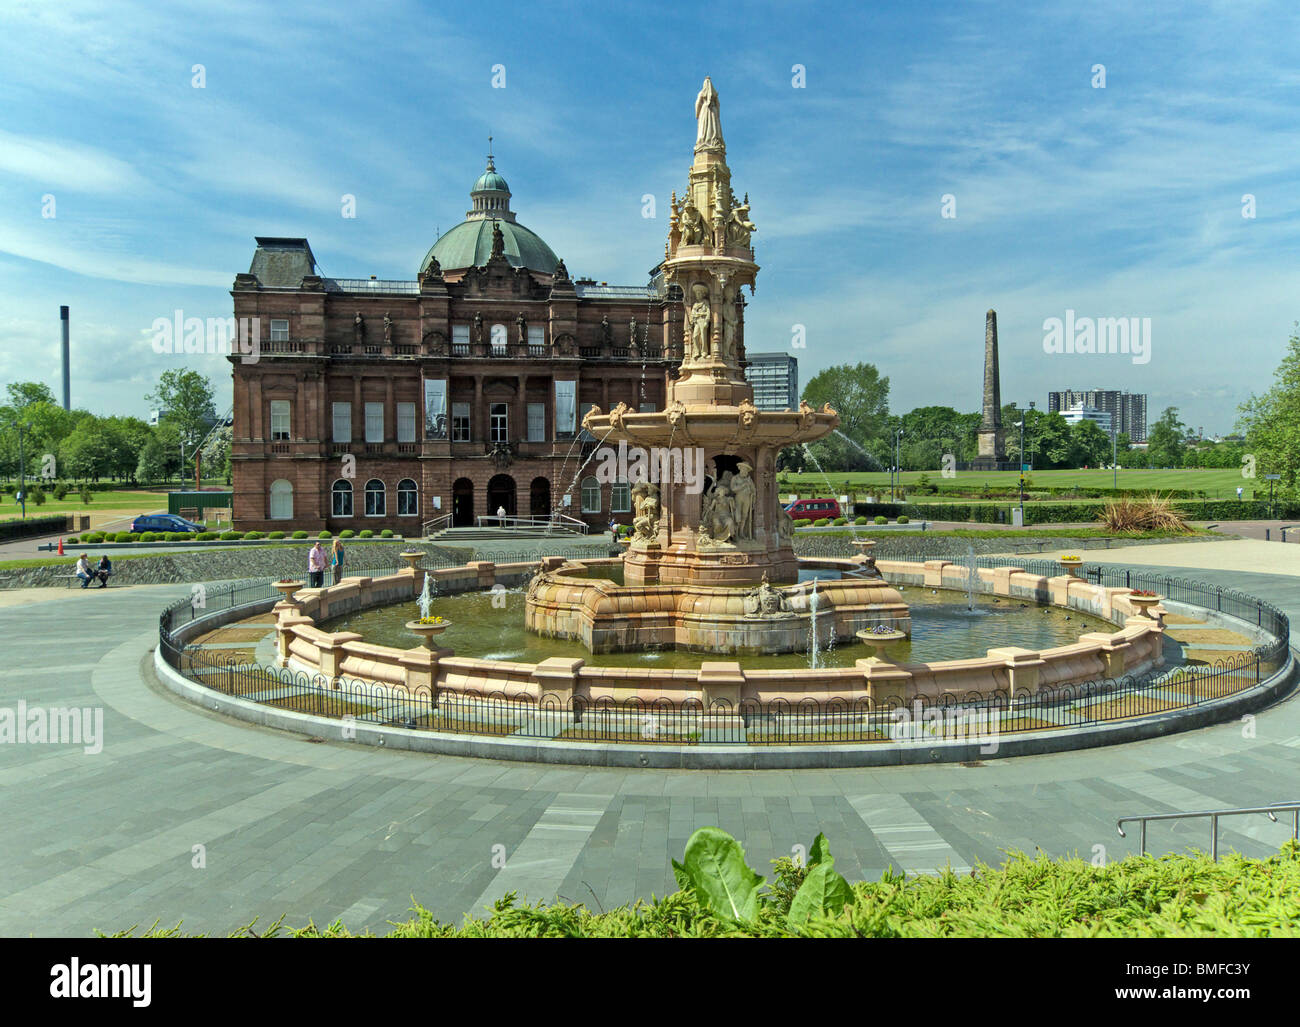 Il Doulton Fontana in Glasgow Green park in east end di Glasgow dal fiume Clyde Foto Stock